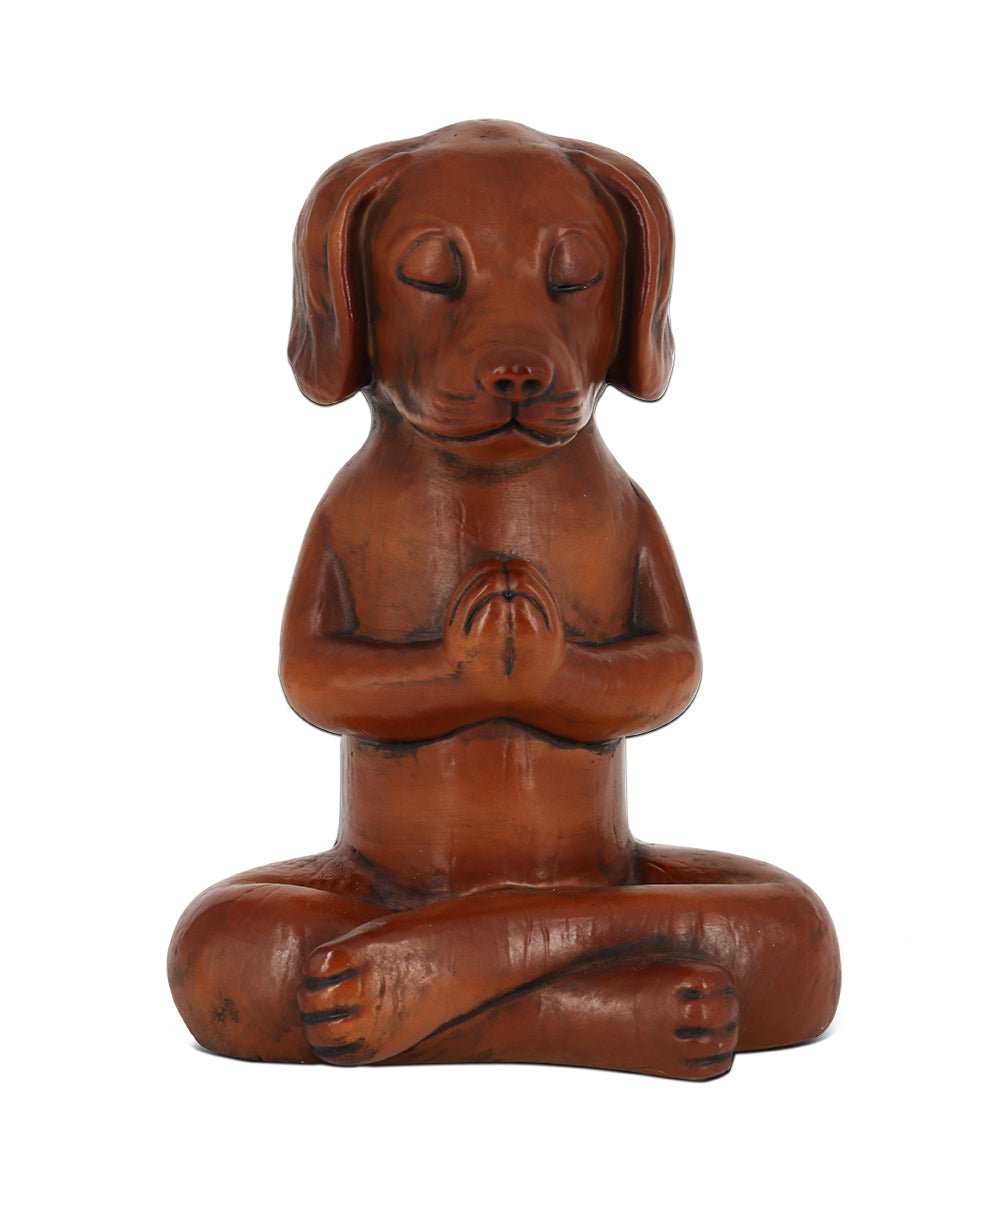 Namaste Dog Statue in Rich Mahogany Tone - Sculptures & Statues